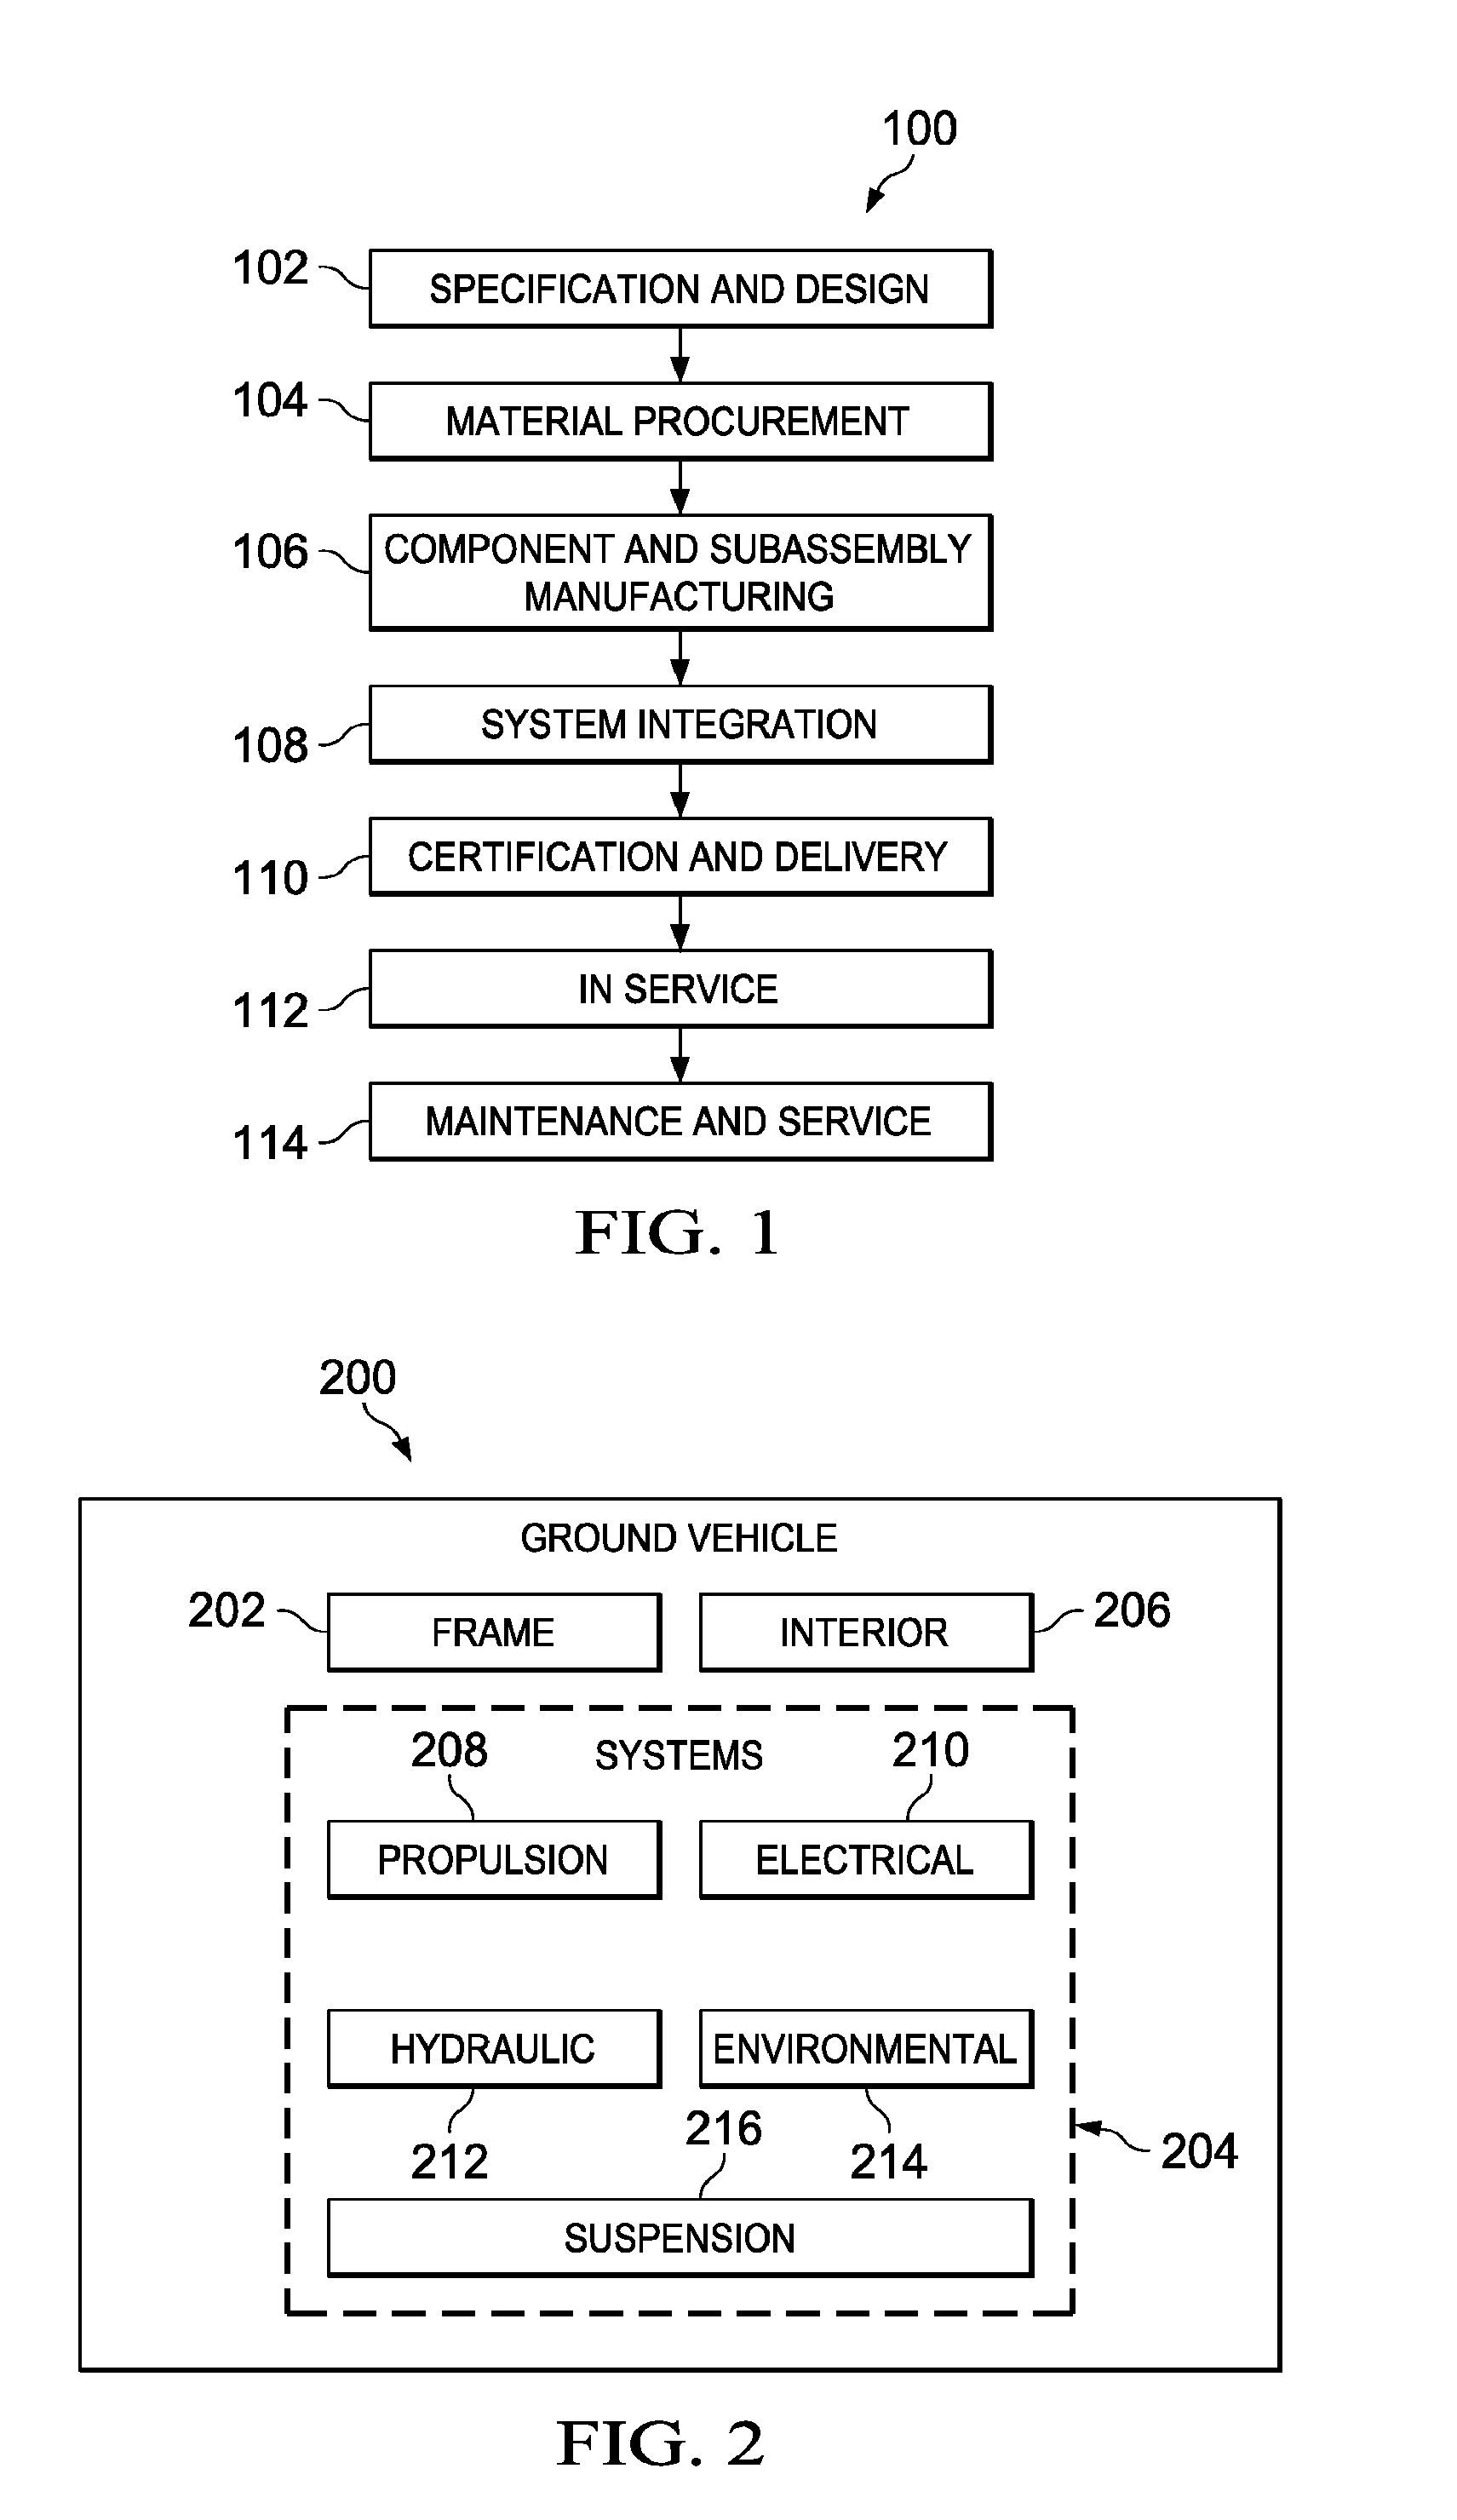 Blast load attenuation system for a vehicle